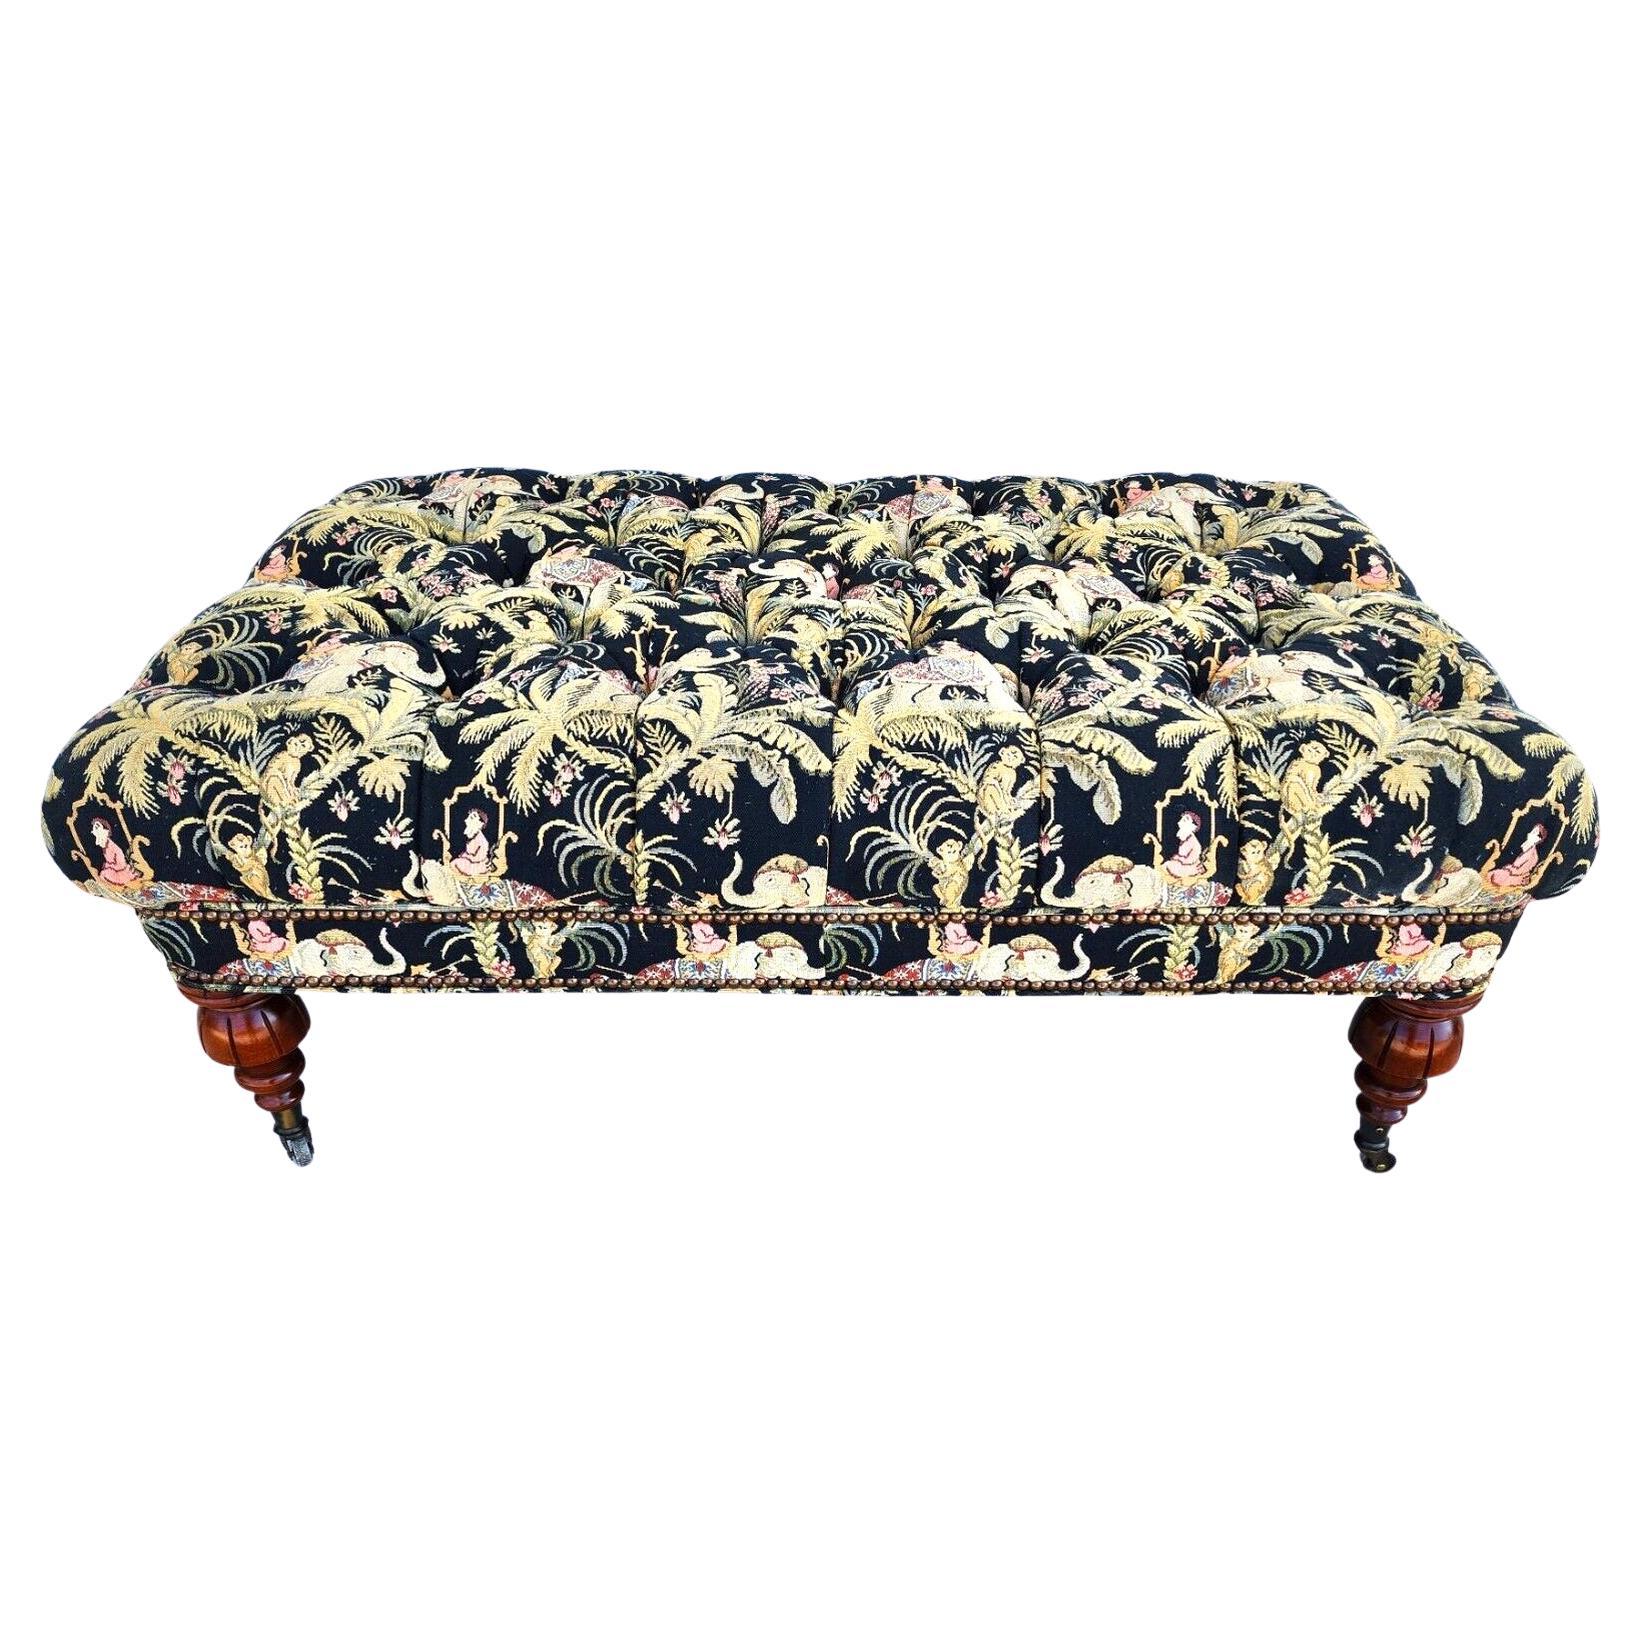 Ottoman Coffee Table Oversized Tufted Rolling African Asian Elephants Monkeys For Sale